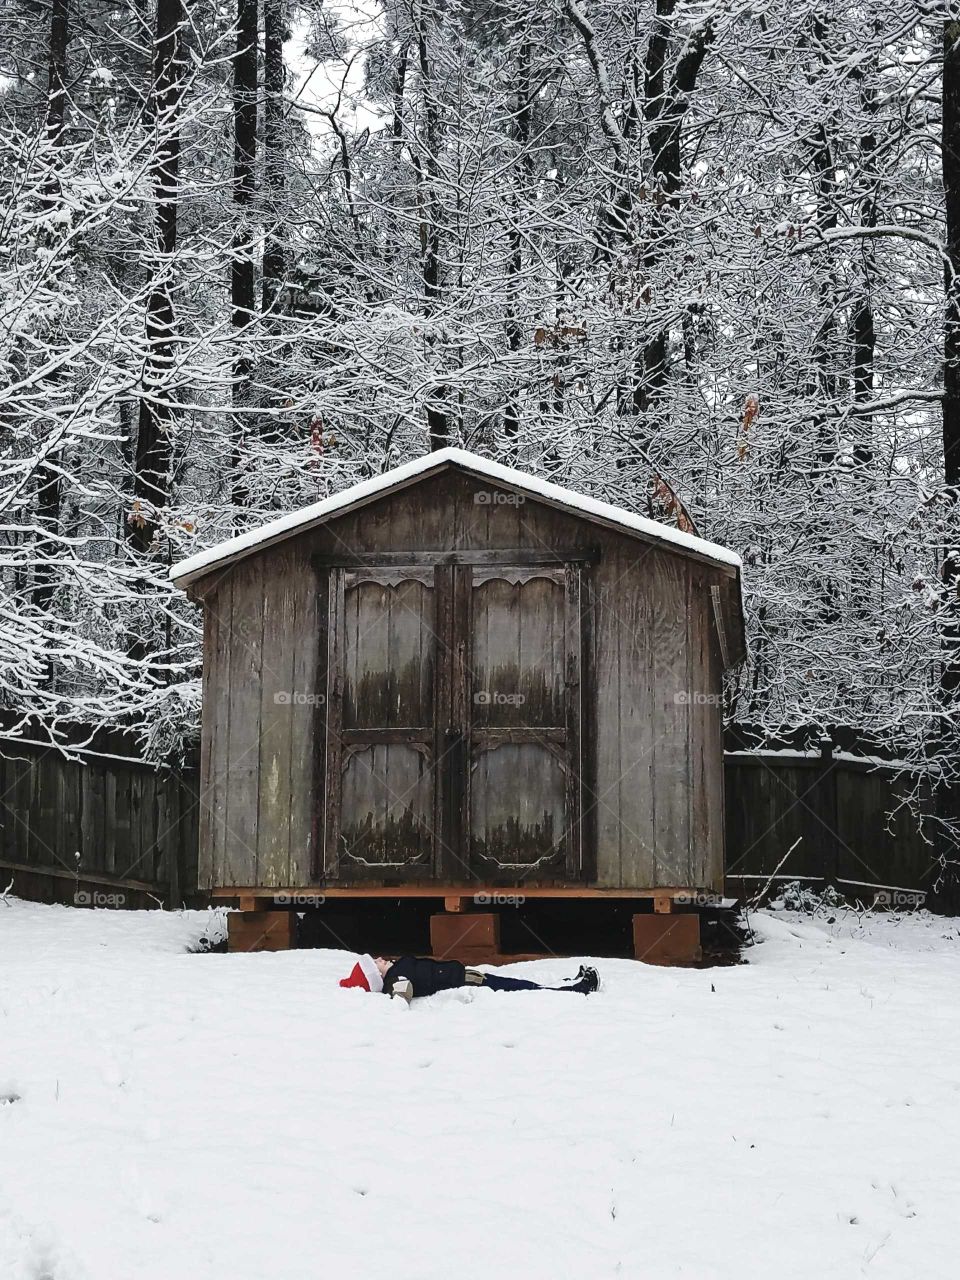 Boy and Snow Shed